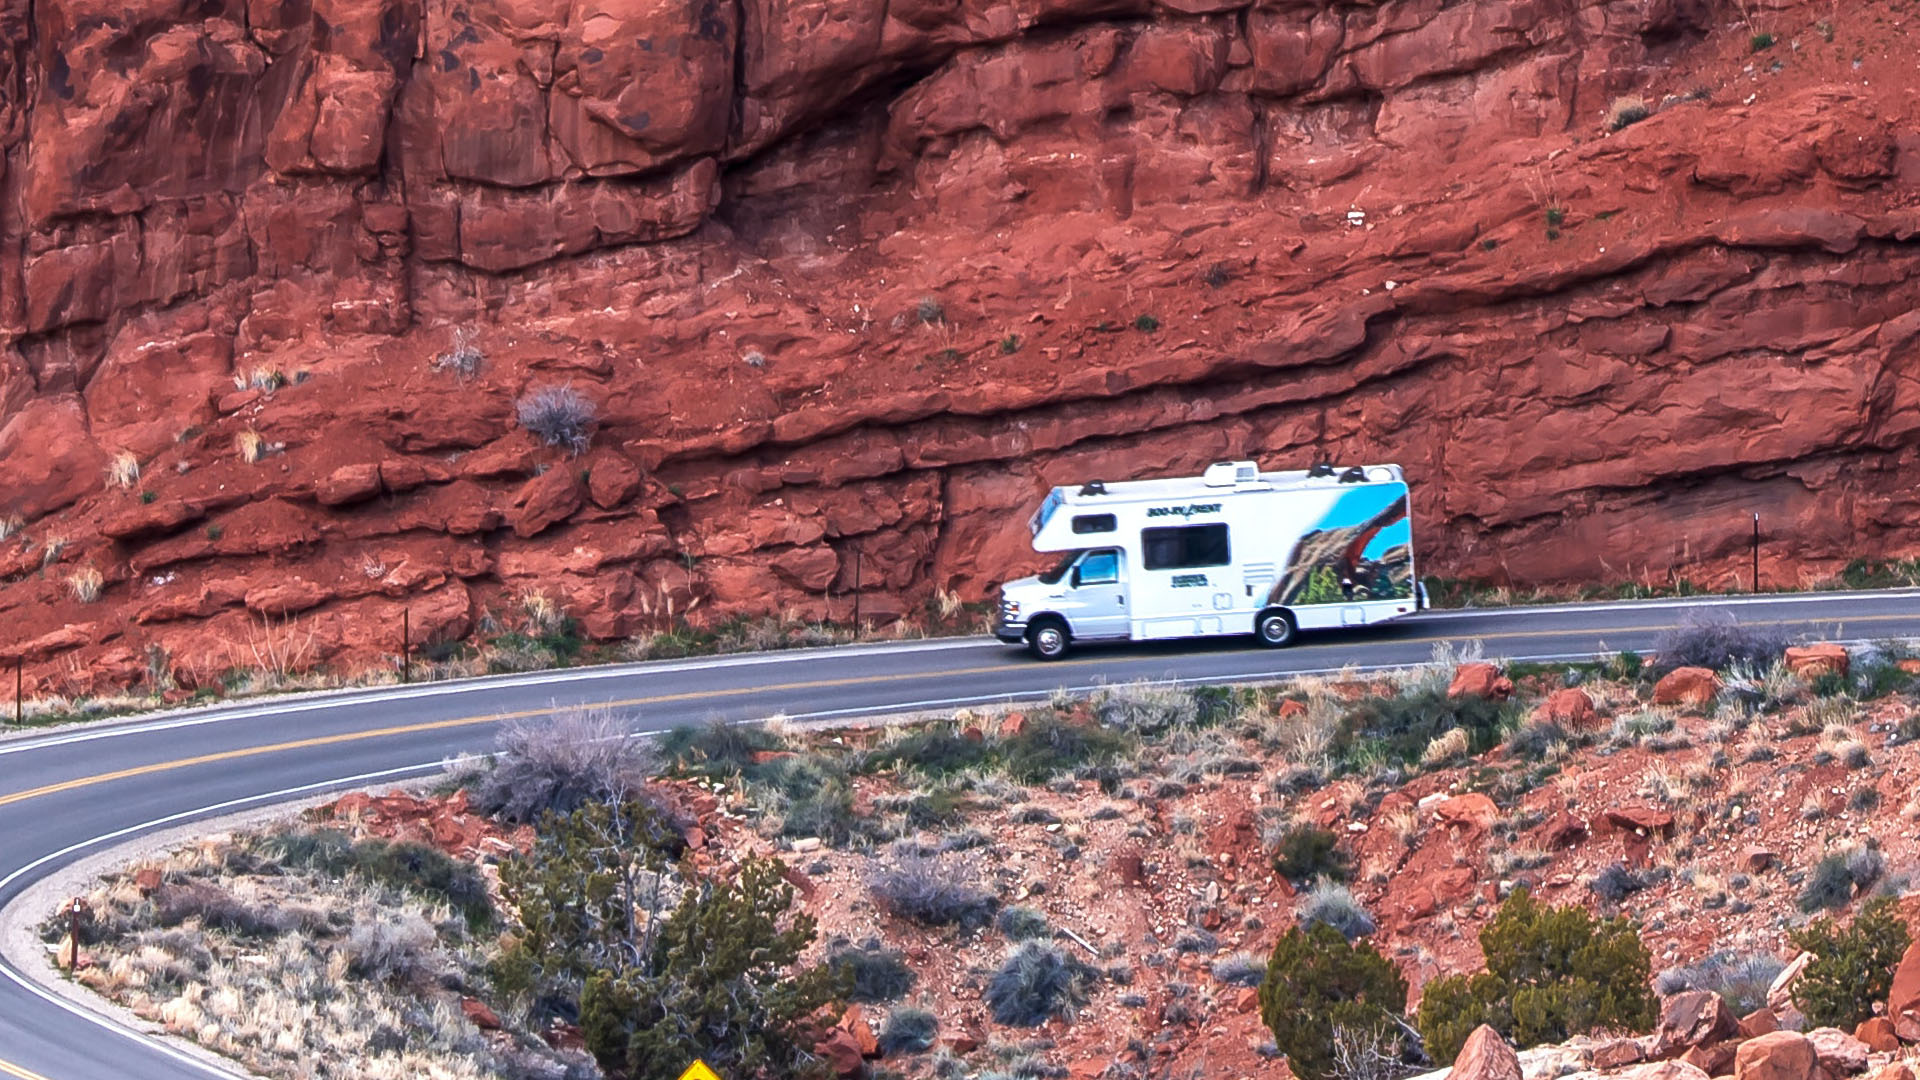 RV parked on a road in a dramatic landscape